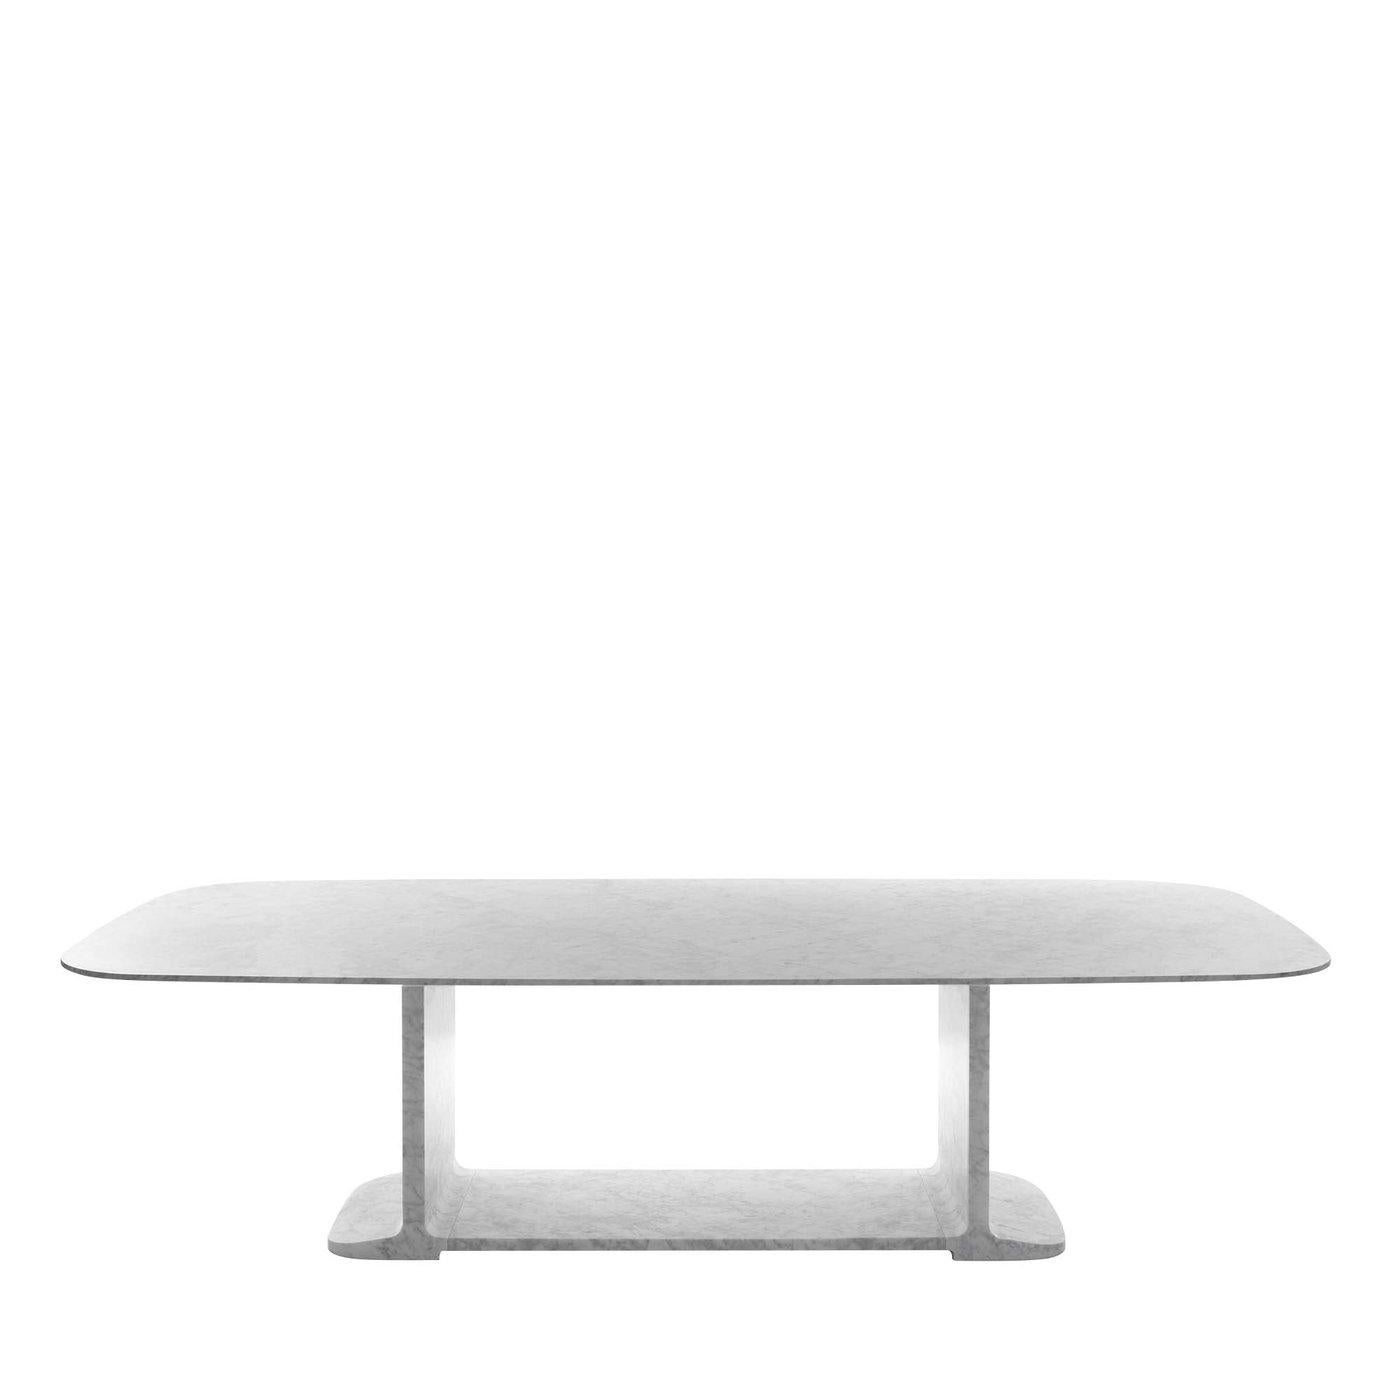 Dining table, soft square, in White Carrara marble, matt polished finish